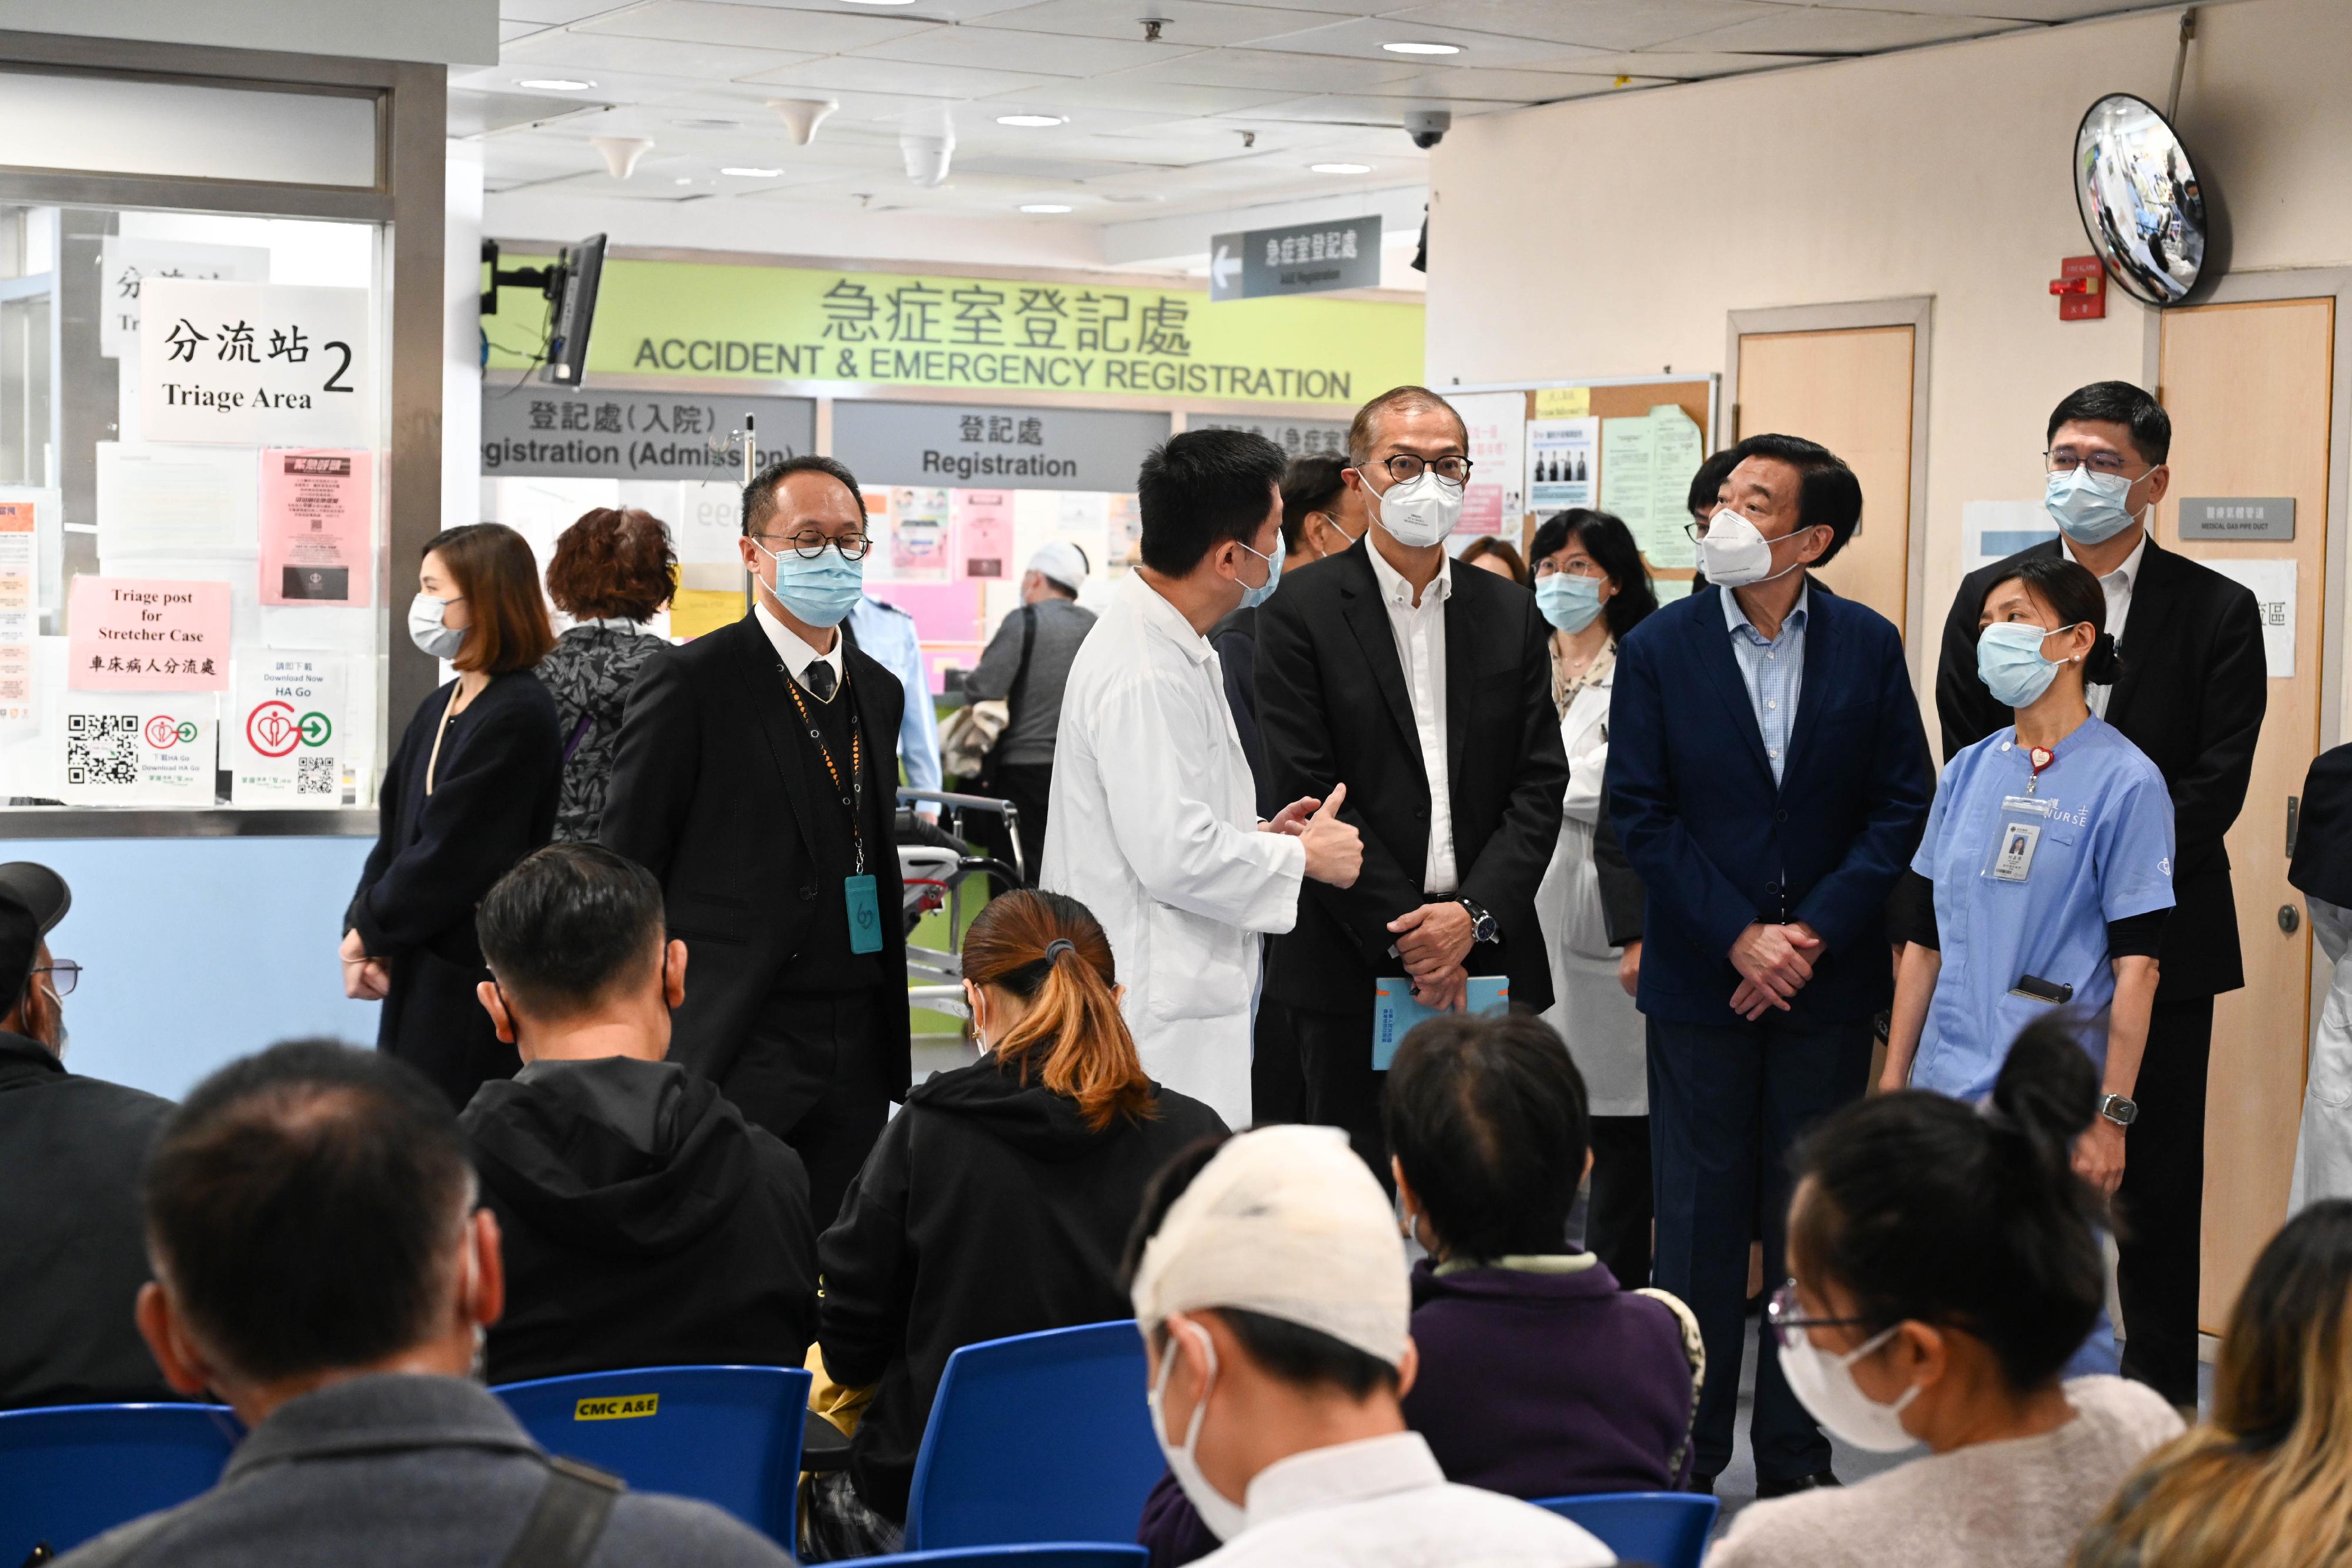 The Secretary for Health, Professor Lo Chung-mau (fourth right), visited Caritas Medical Centre today (December 7) to get a better grasp of the operation of the accident and emergency department of the hospital. The Hospital Authority (HA) Chairman, Mr Henry Fan (third right), and the HA Chief Executive, Dr Tony Ko (first right), also attended.


